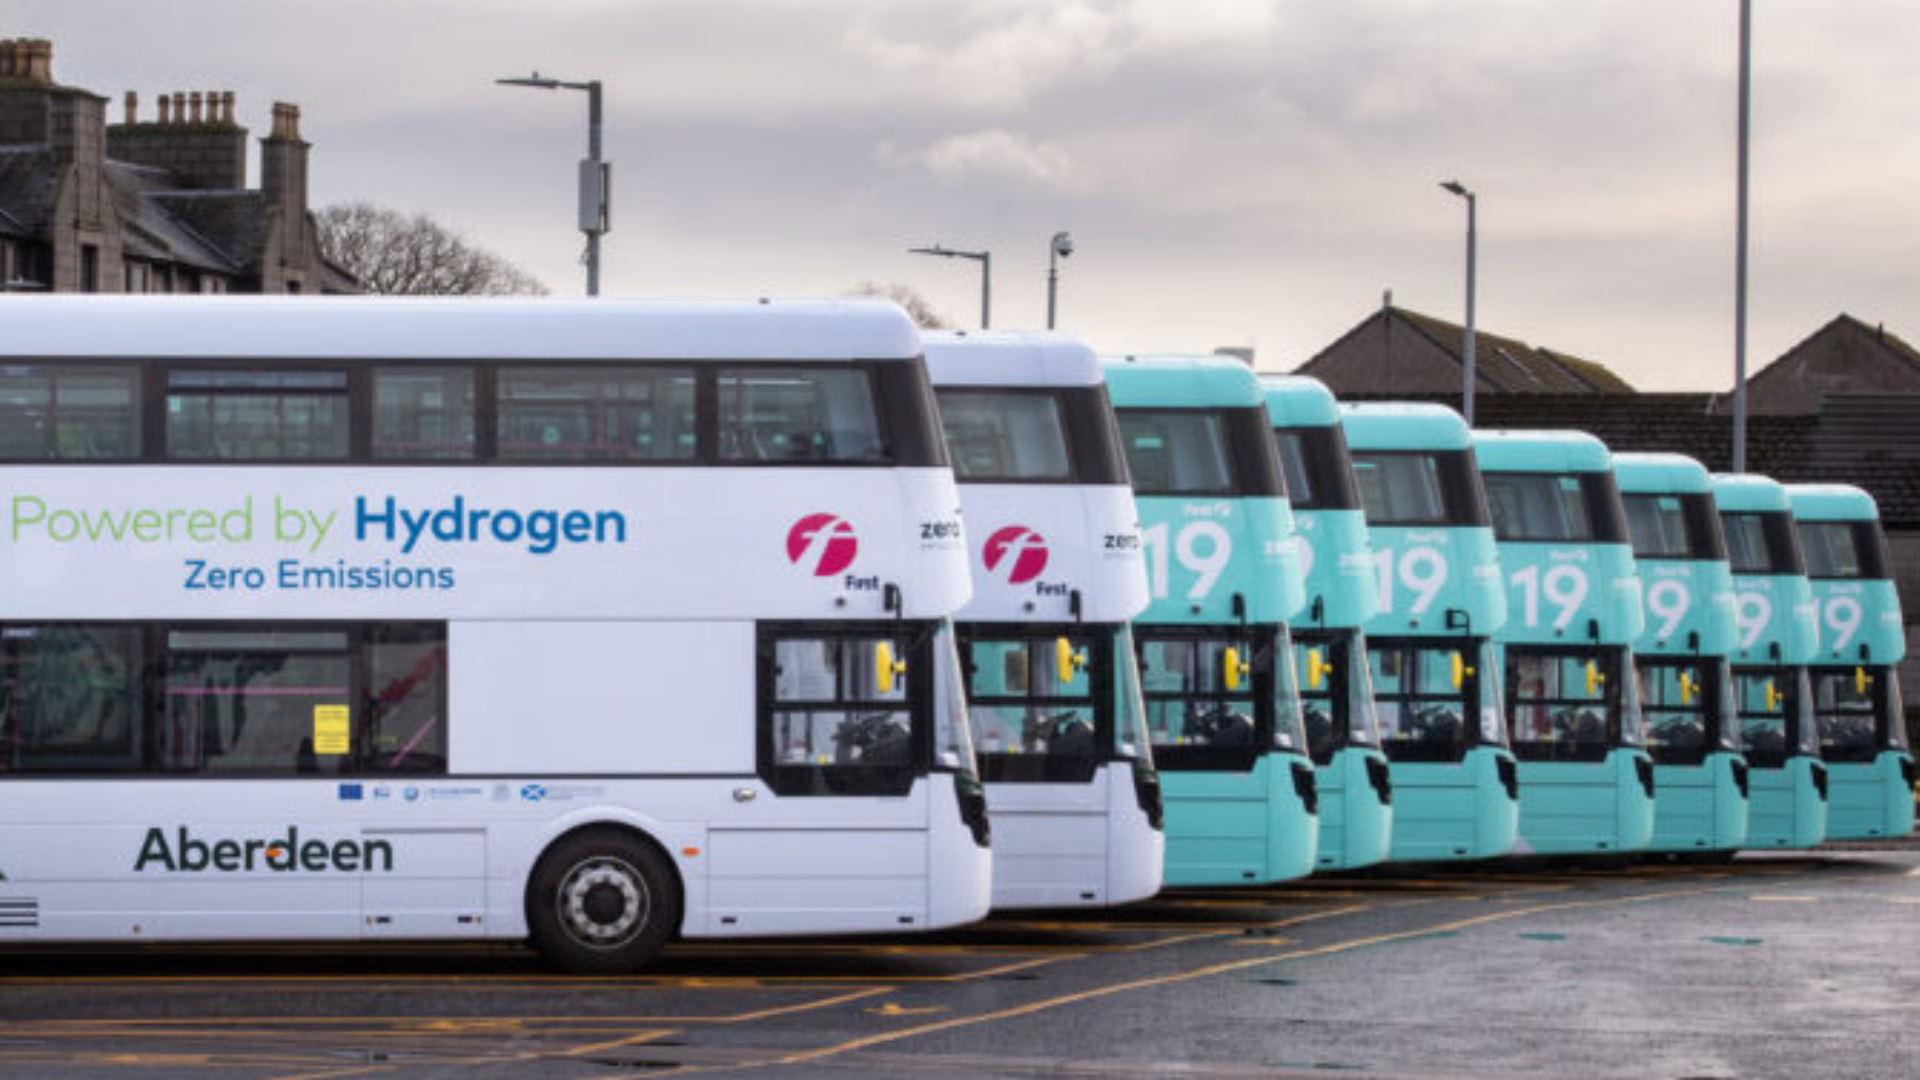 Wrightbus fleet of fuel cell electric buses in Aberdeen, Scotland